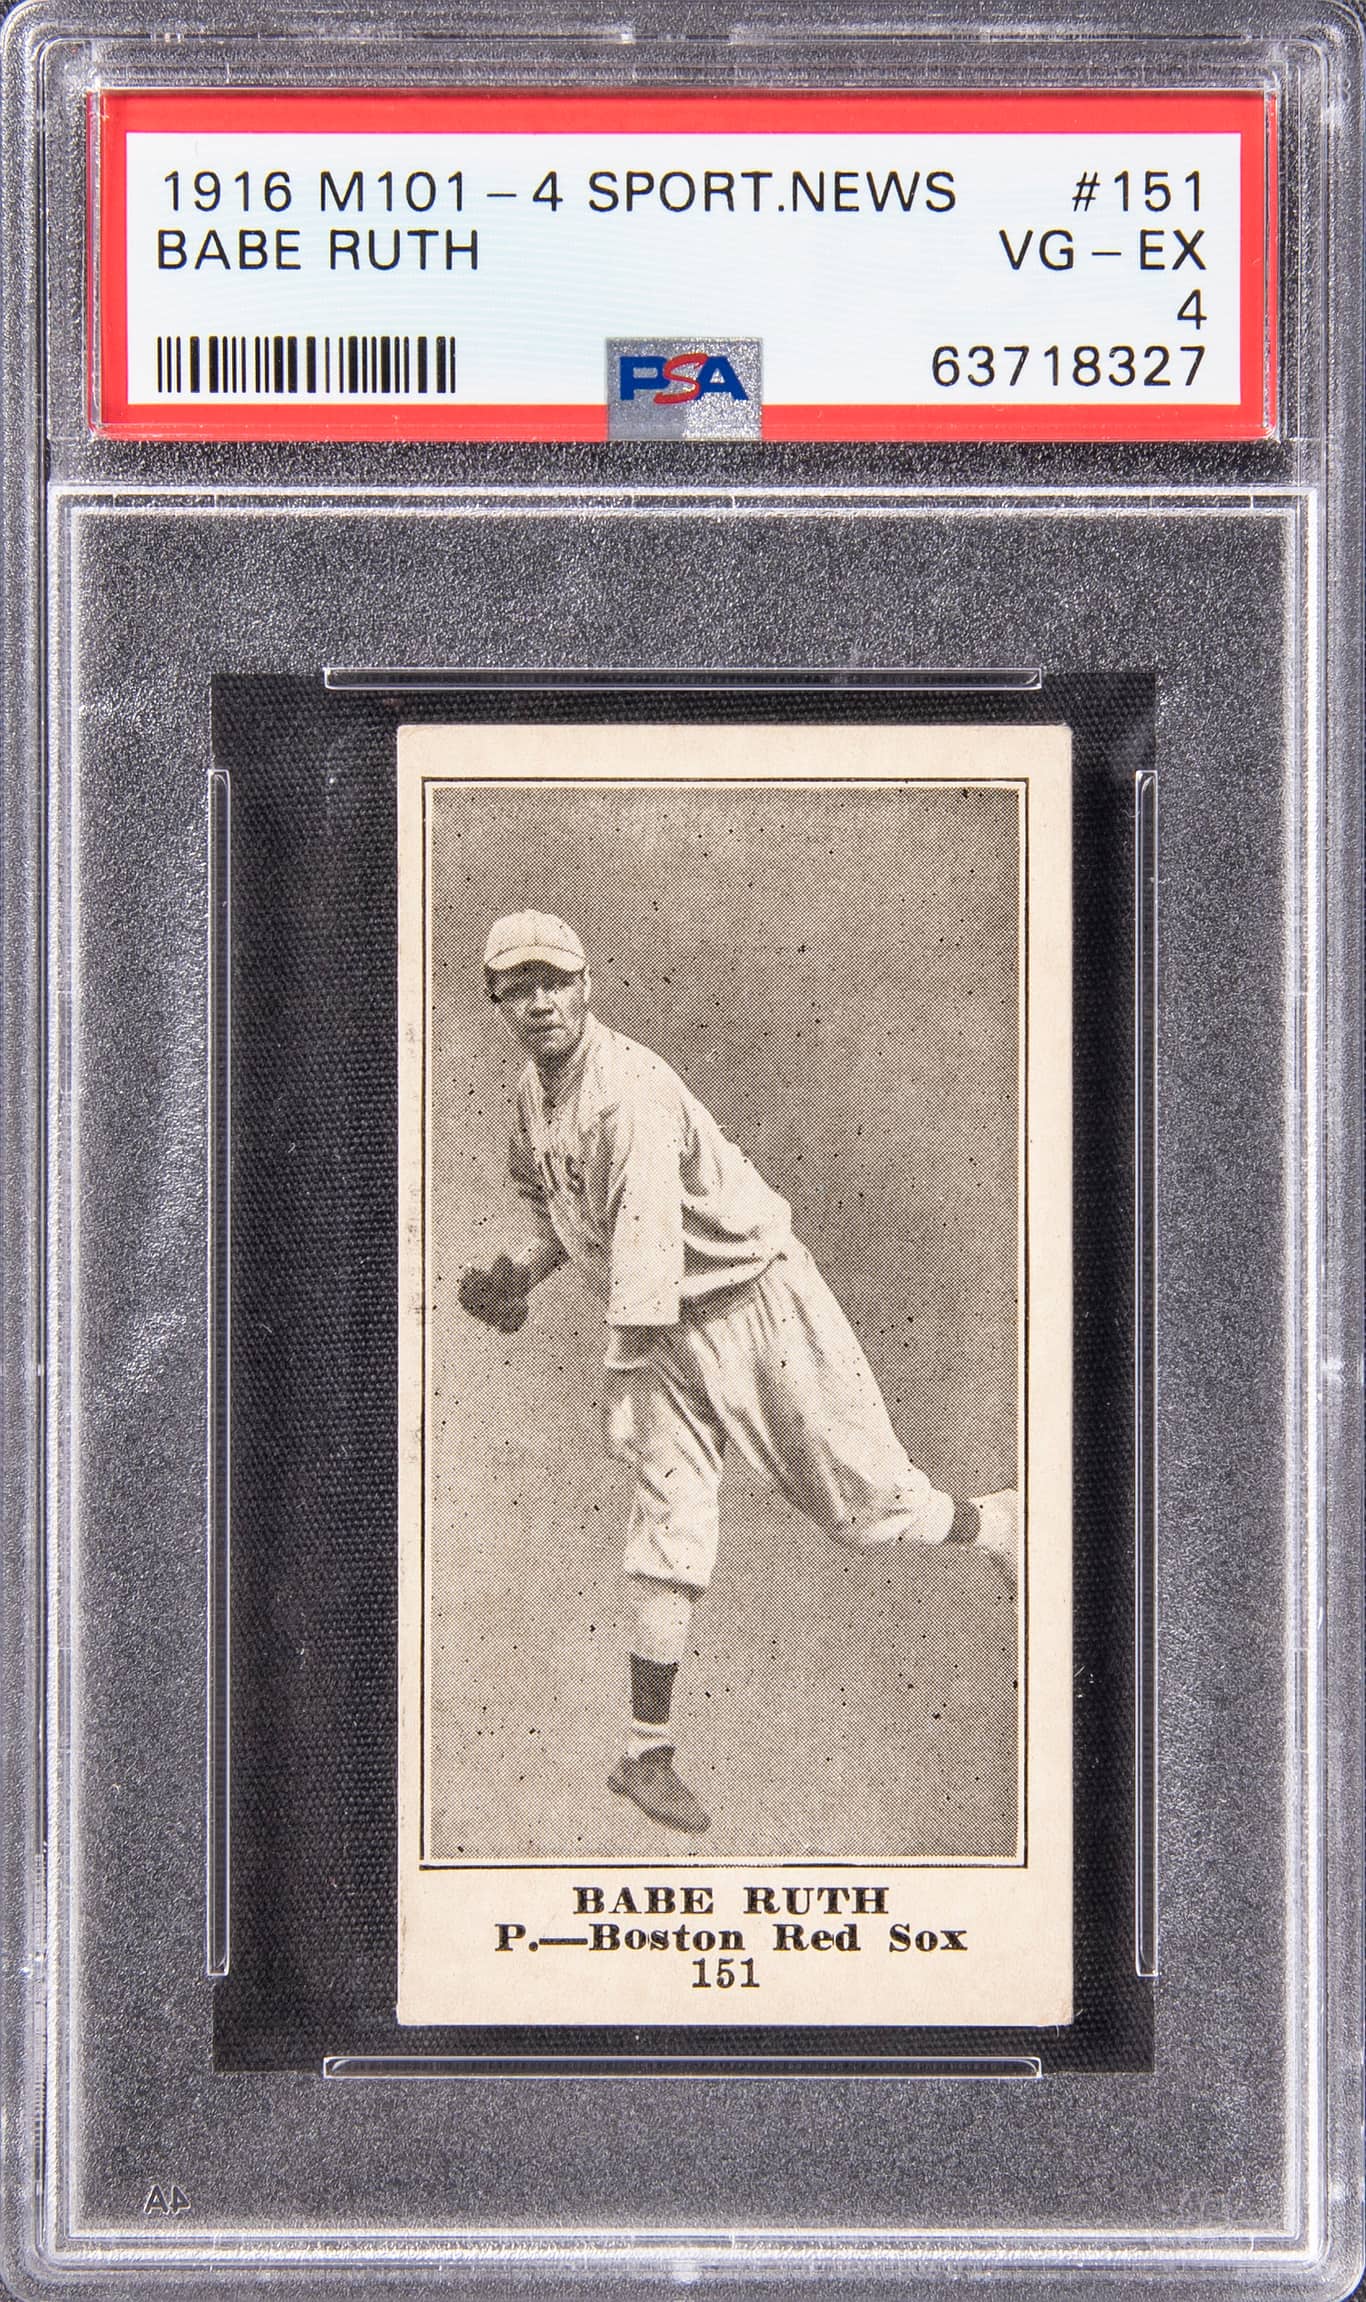 Goldin on Twitter: "Final Sale Price this Babe Ruth 1916 M101-4 Sporting News Card: $510,020 The highest price for this card in a PSA 4. https://t.co/jQLGmS06iV" / Twitter